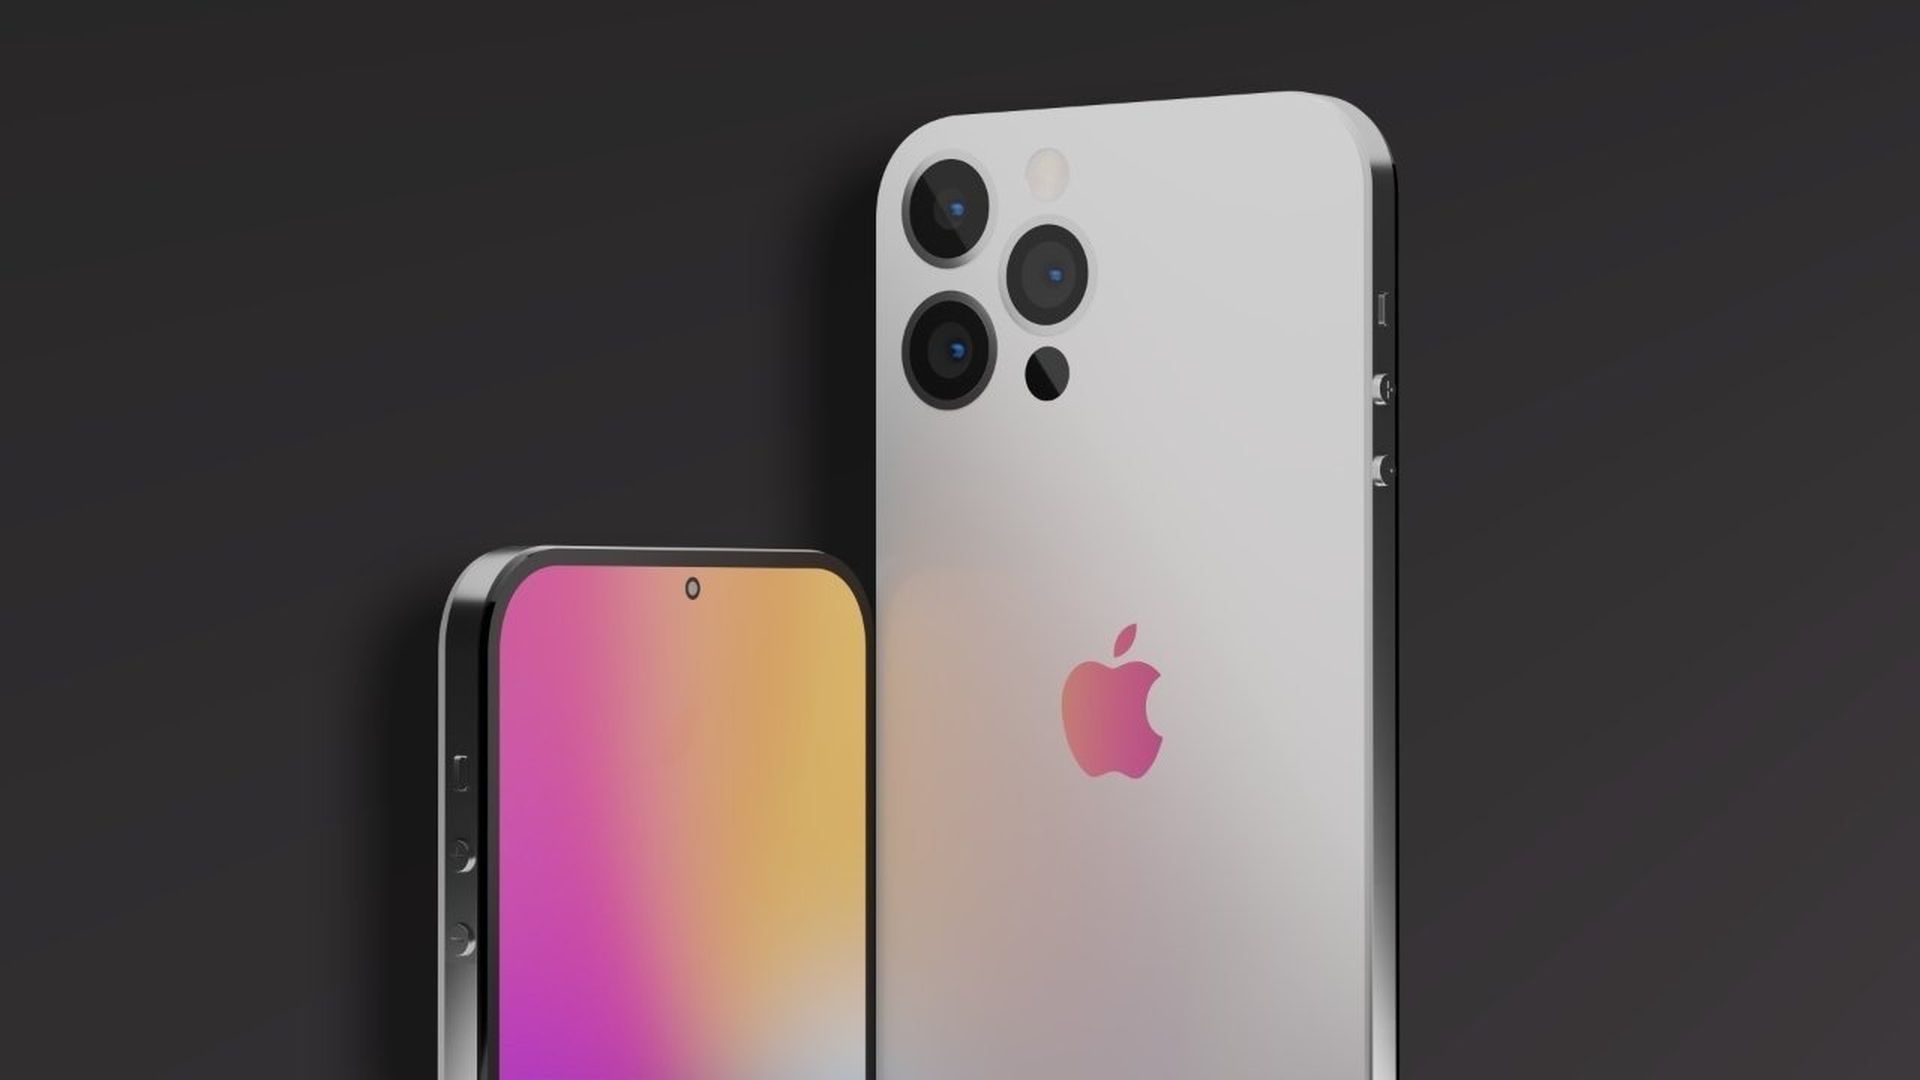 We have gathered all iPhone 14 Pro leaks for those who want to know more about its specs, price, release date, design, cameras, battery life, and more.